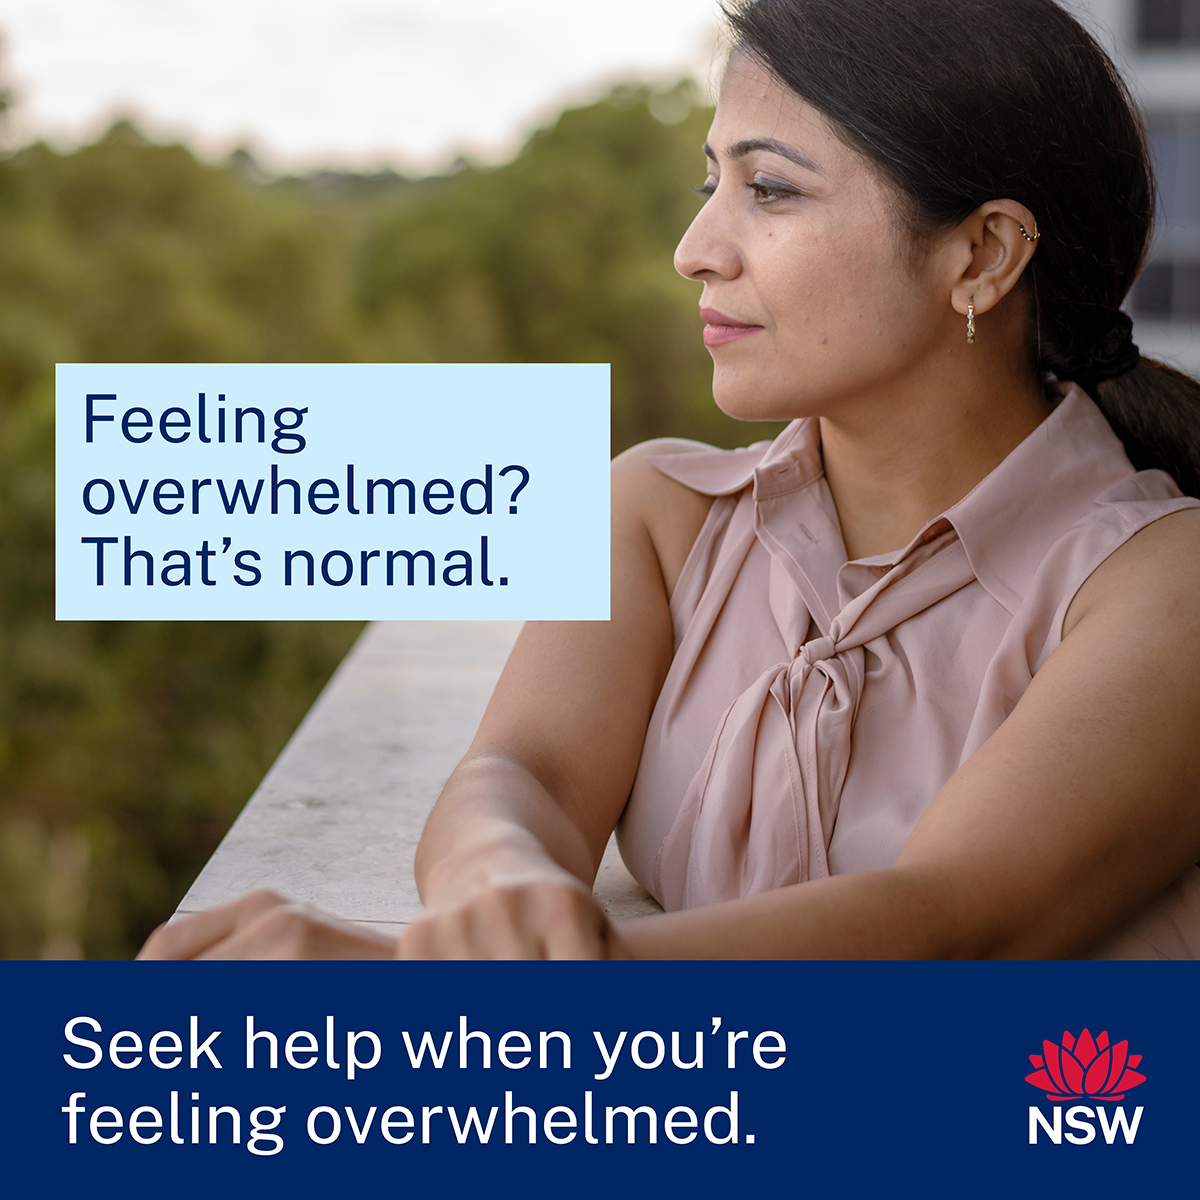 Whether you’re directly impacted, worried about loved ones, or feeling overwhelmed by recent tragic and traumatic events – it’s all very normal. But please know that you don’t need to face it alone - reach out for support. More info: health.nsw.gov.au/mentalhealth/s…